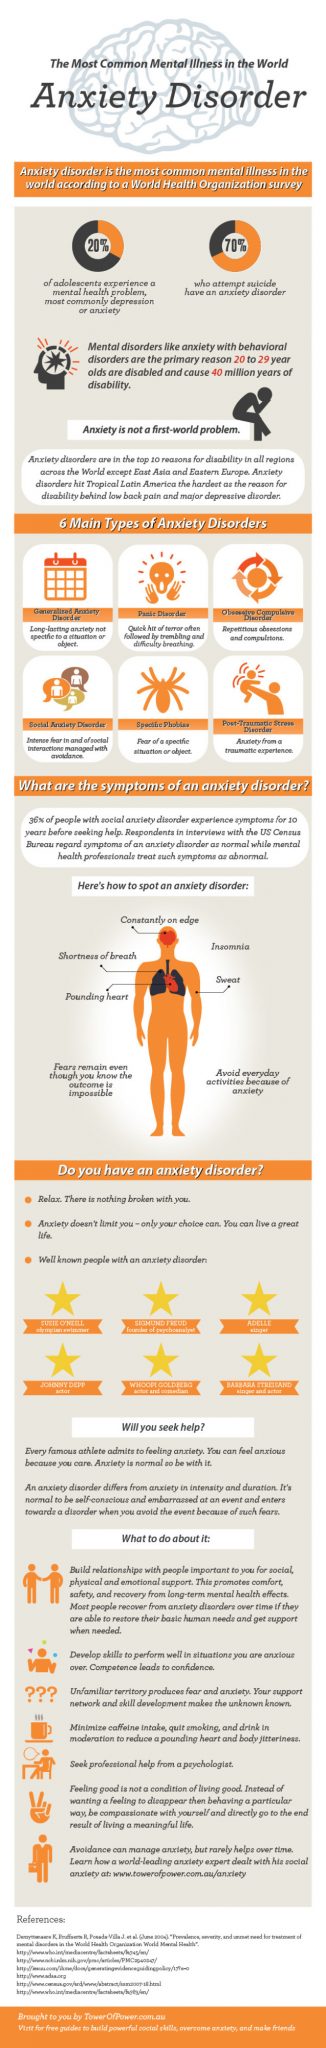 What You Should Know About Anxiety Disorders